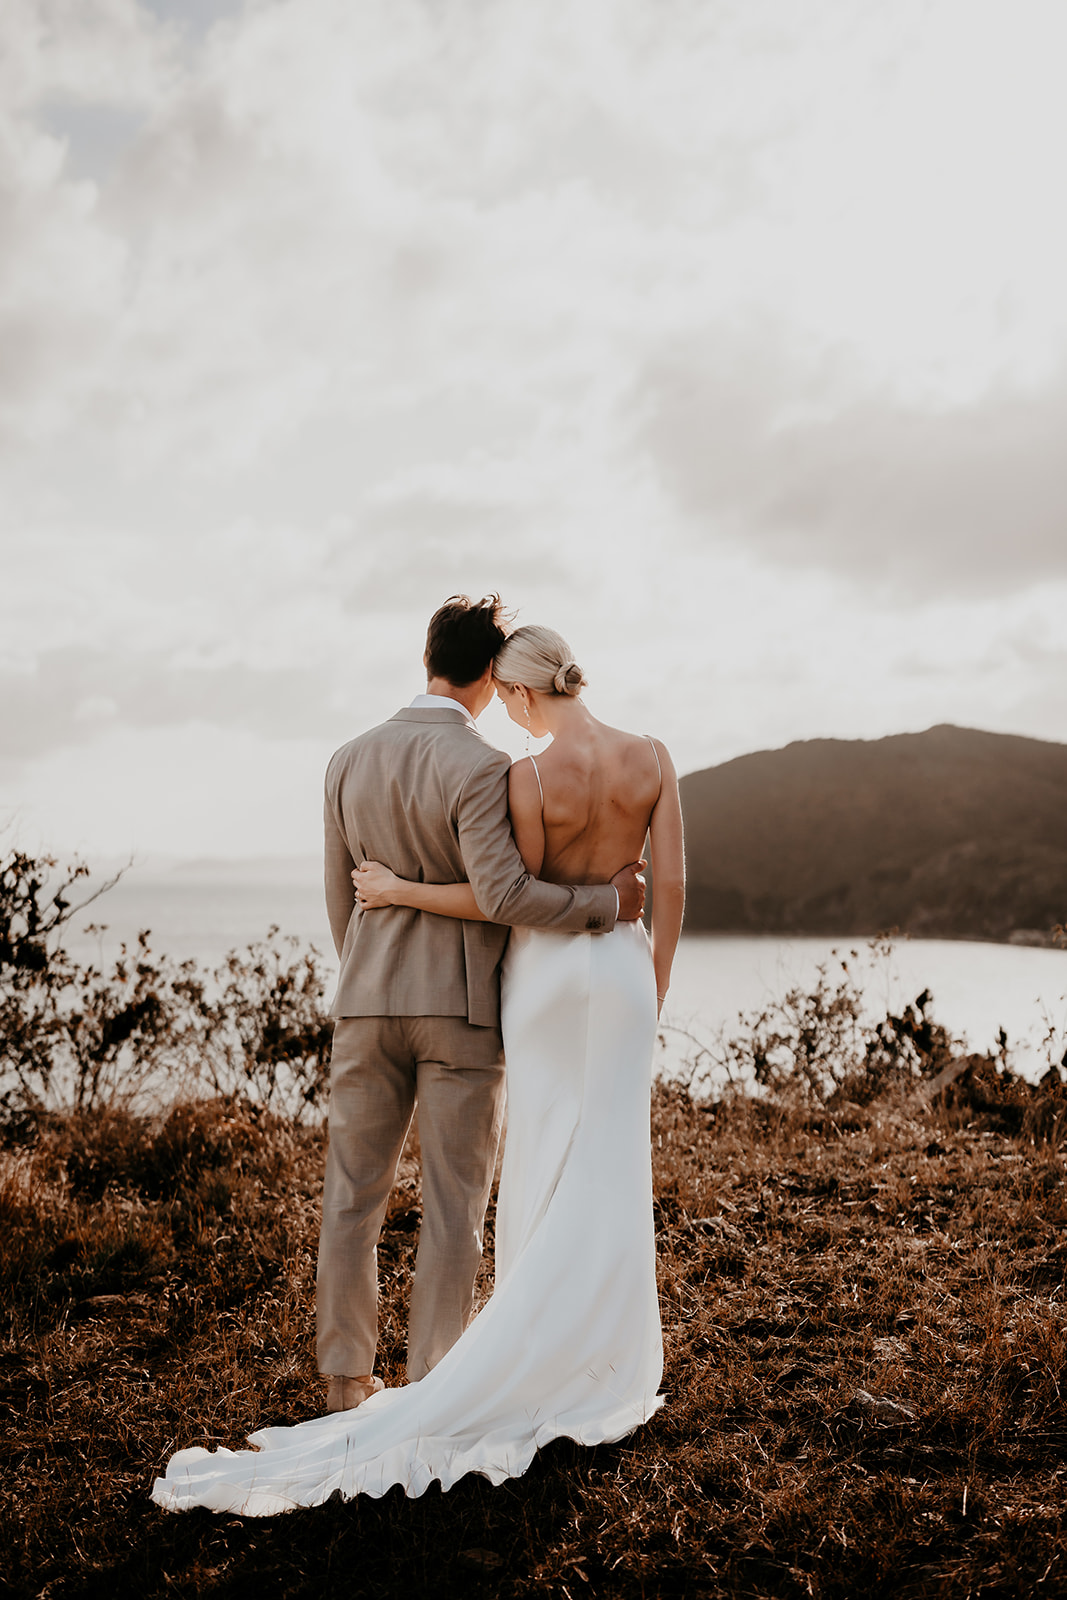 Candid shot of the bride and groom embracing looking out onto the ocean in the British Virgin Islands.